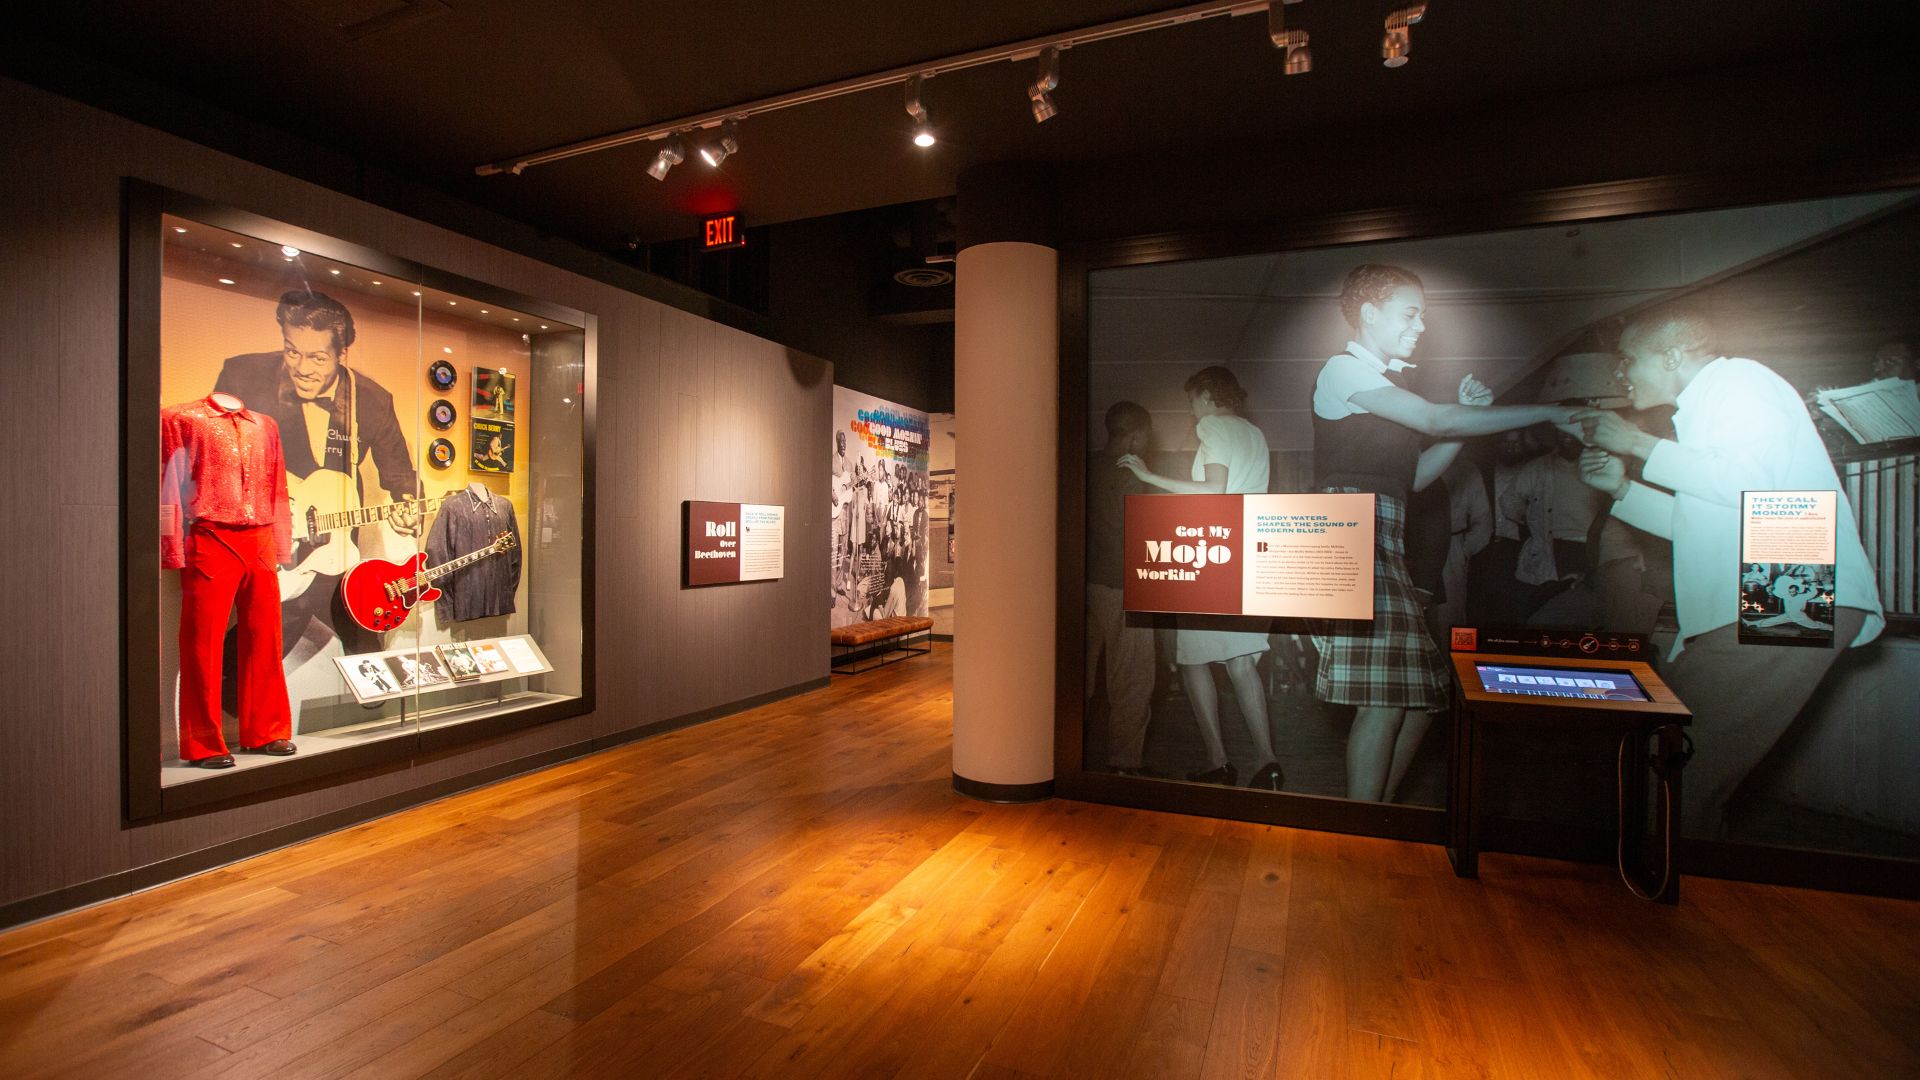 The National Blues Museum has artifact-driven exhibits, which tell the story of blues music.